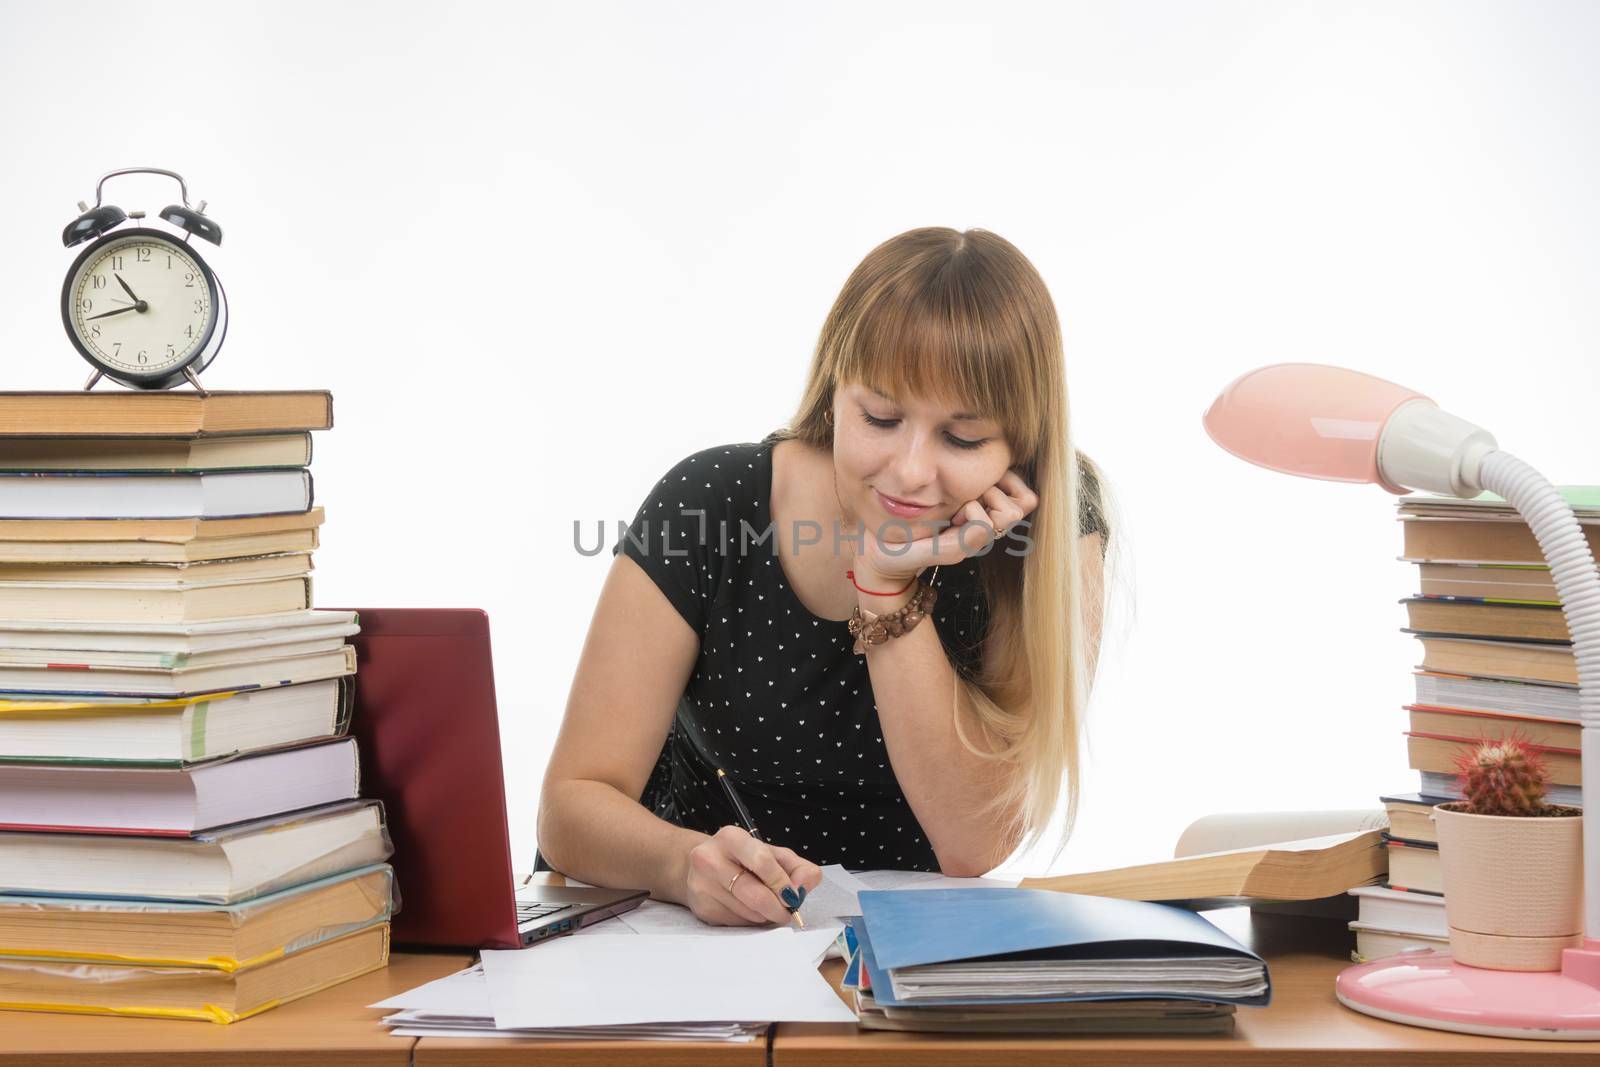 college student smiling engaged at the table cluttered with books in the library